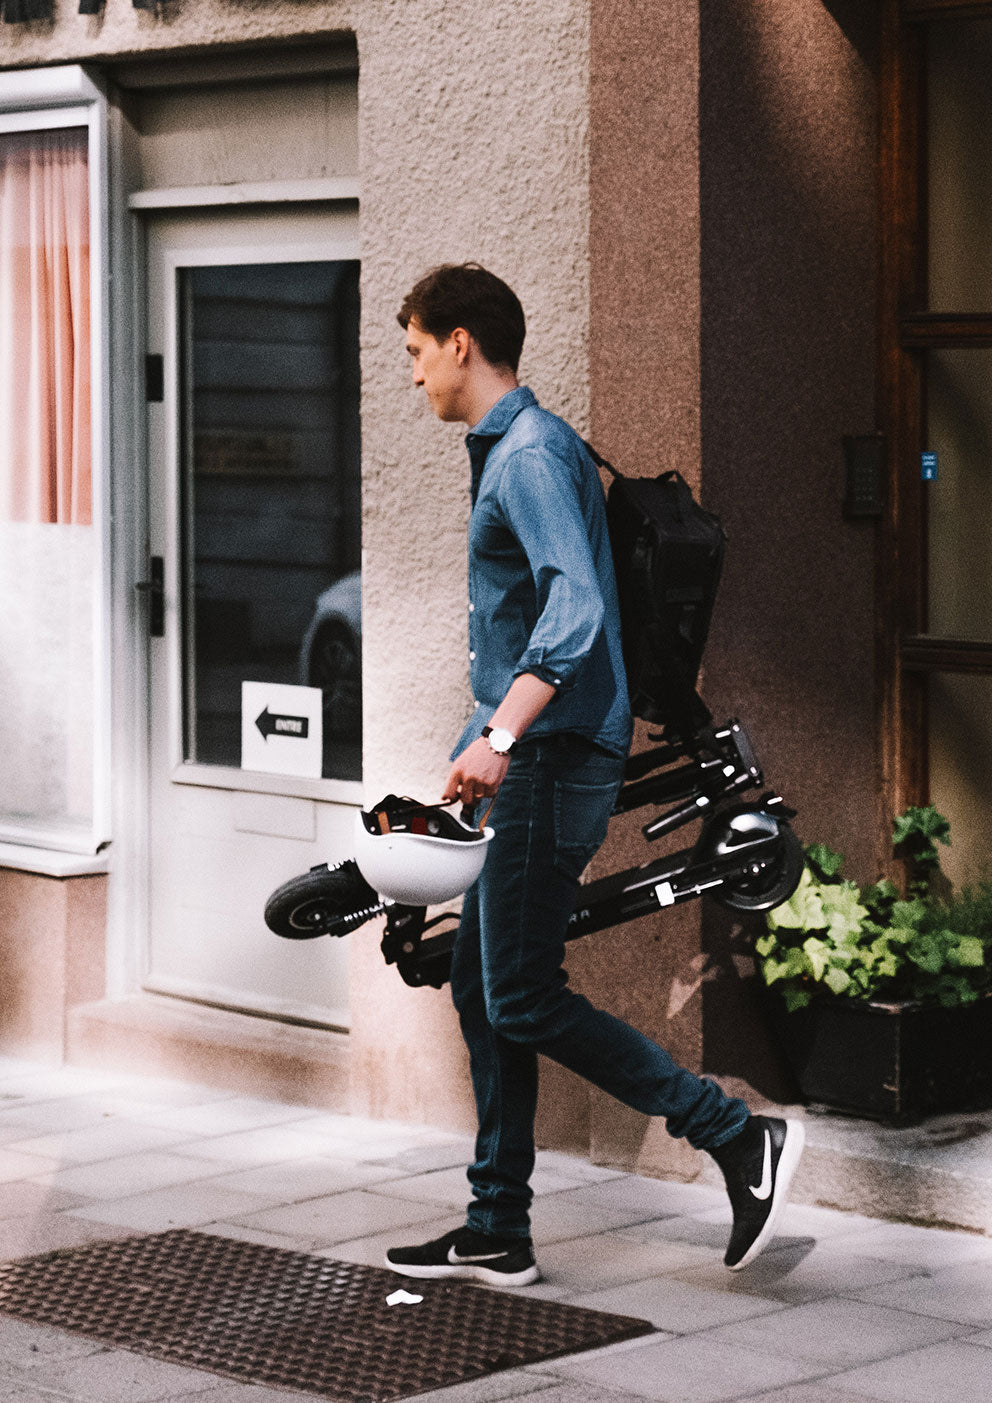 Man walks out the door holding a folded elecetric scooter and a white helmet